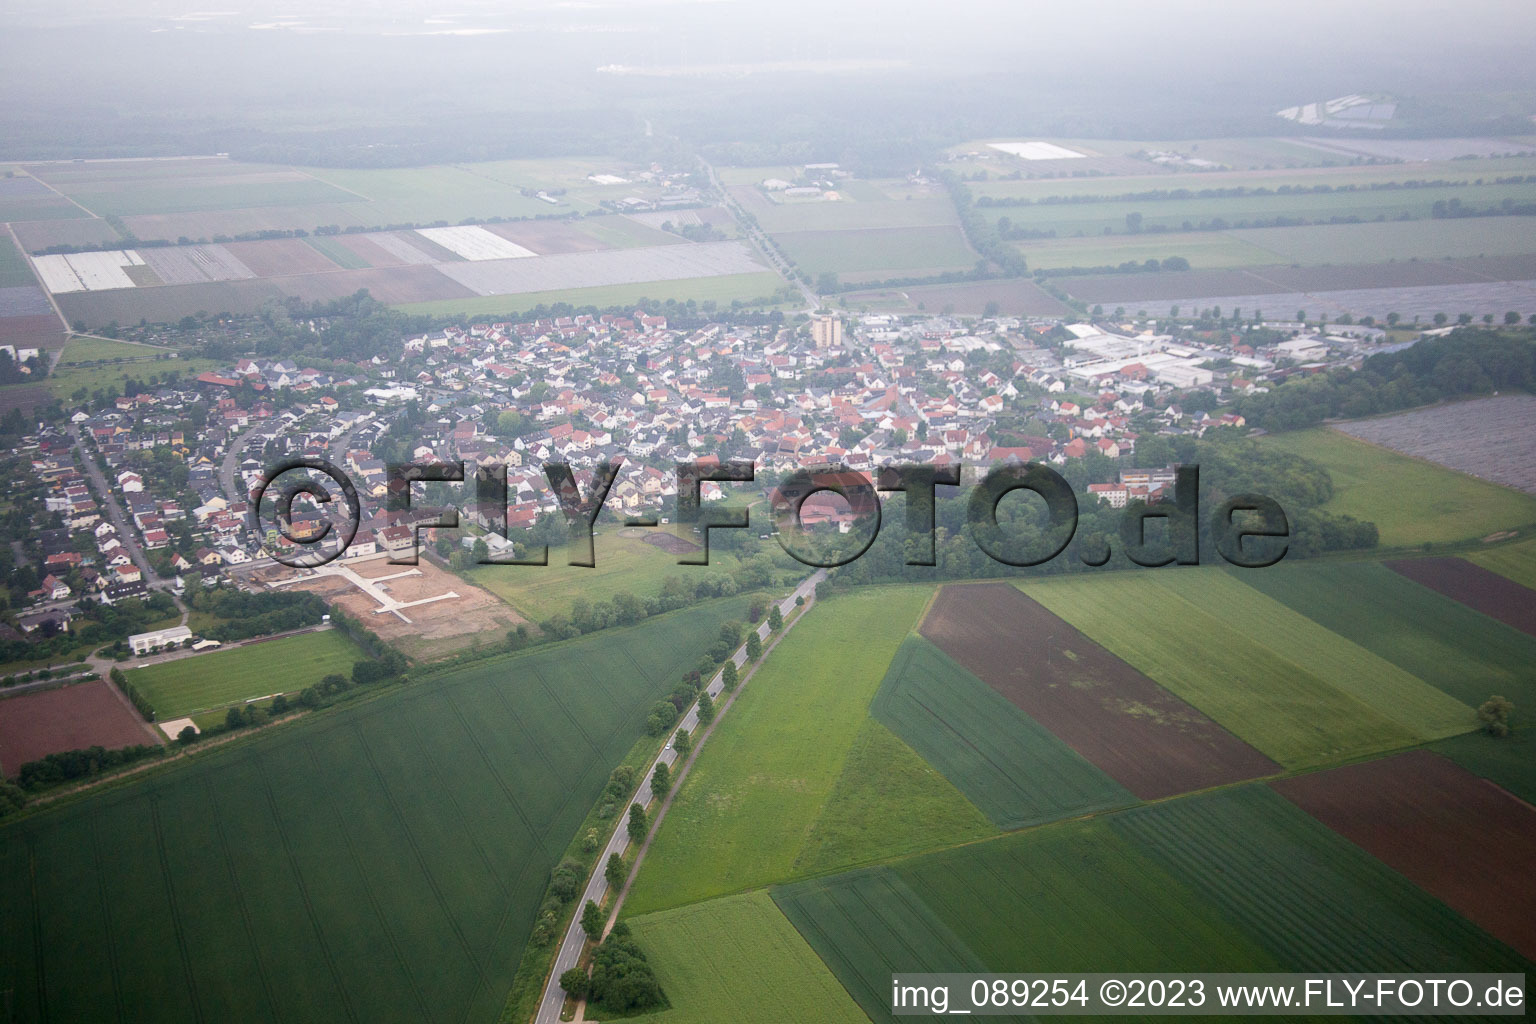 Hüttenfeld in the state Hesse, Germany from the drone perspective